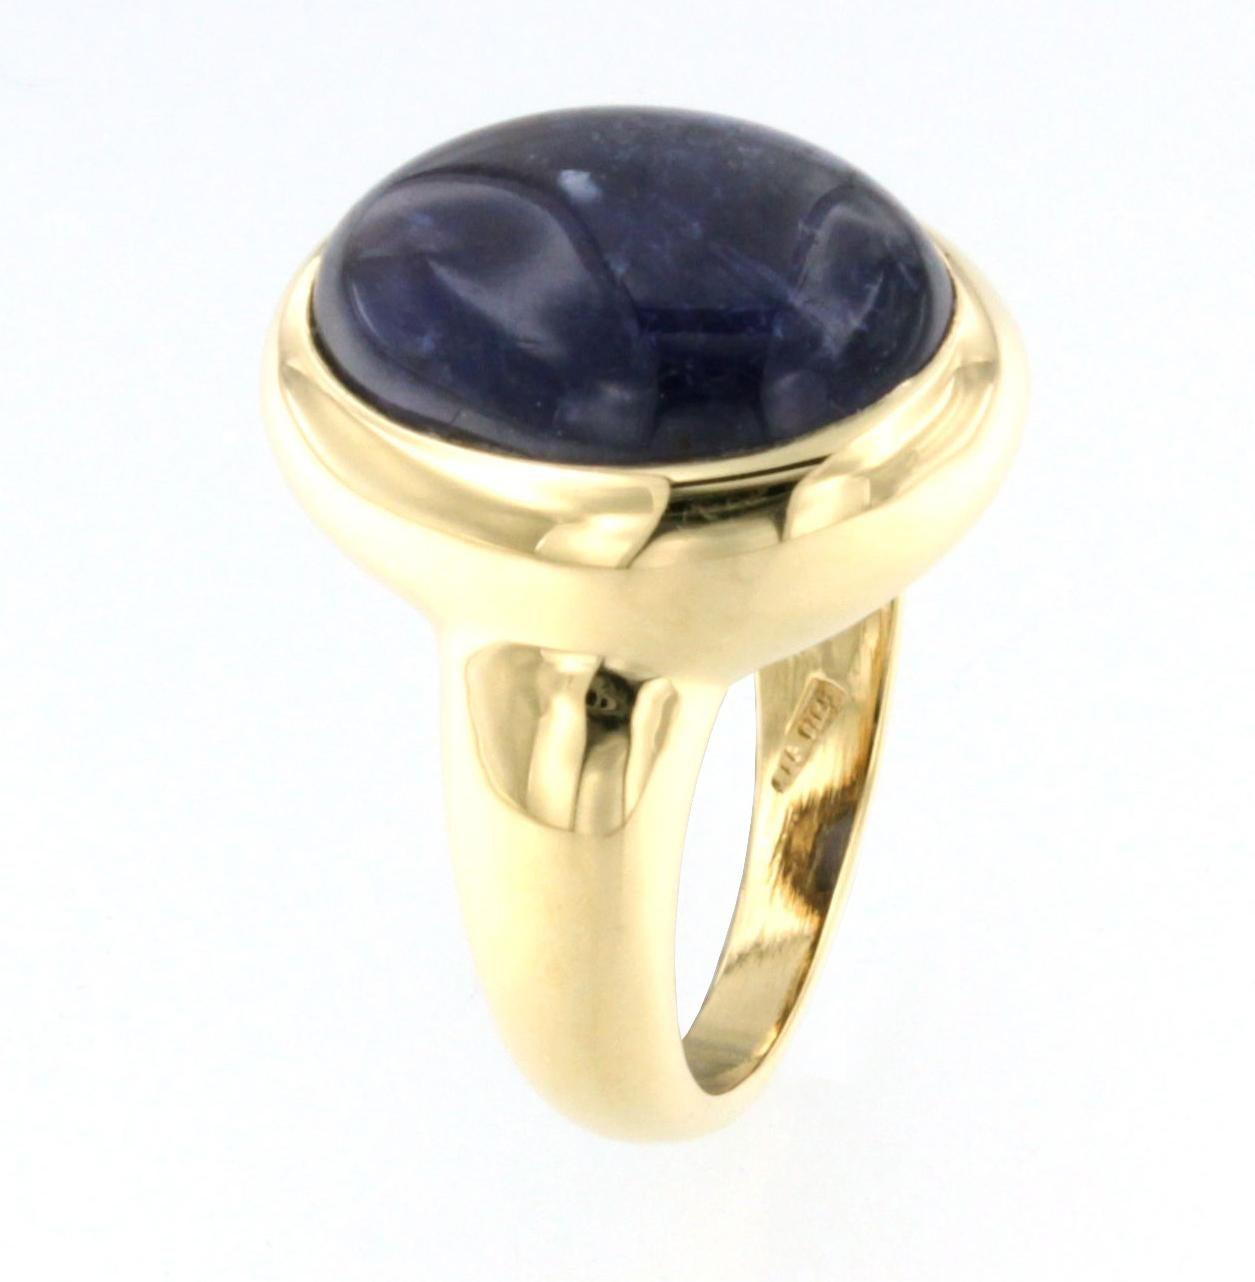 Elegant cocktail ring with blue Iolite stone , timeless design, ideal for the classic and trendy woman

All Stanoppi Jewelry is new and has never been previously owned or worn. Each item will arrive at your door beautifully gift wrapped in Stanoppi 